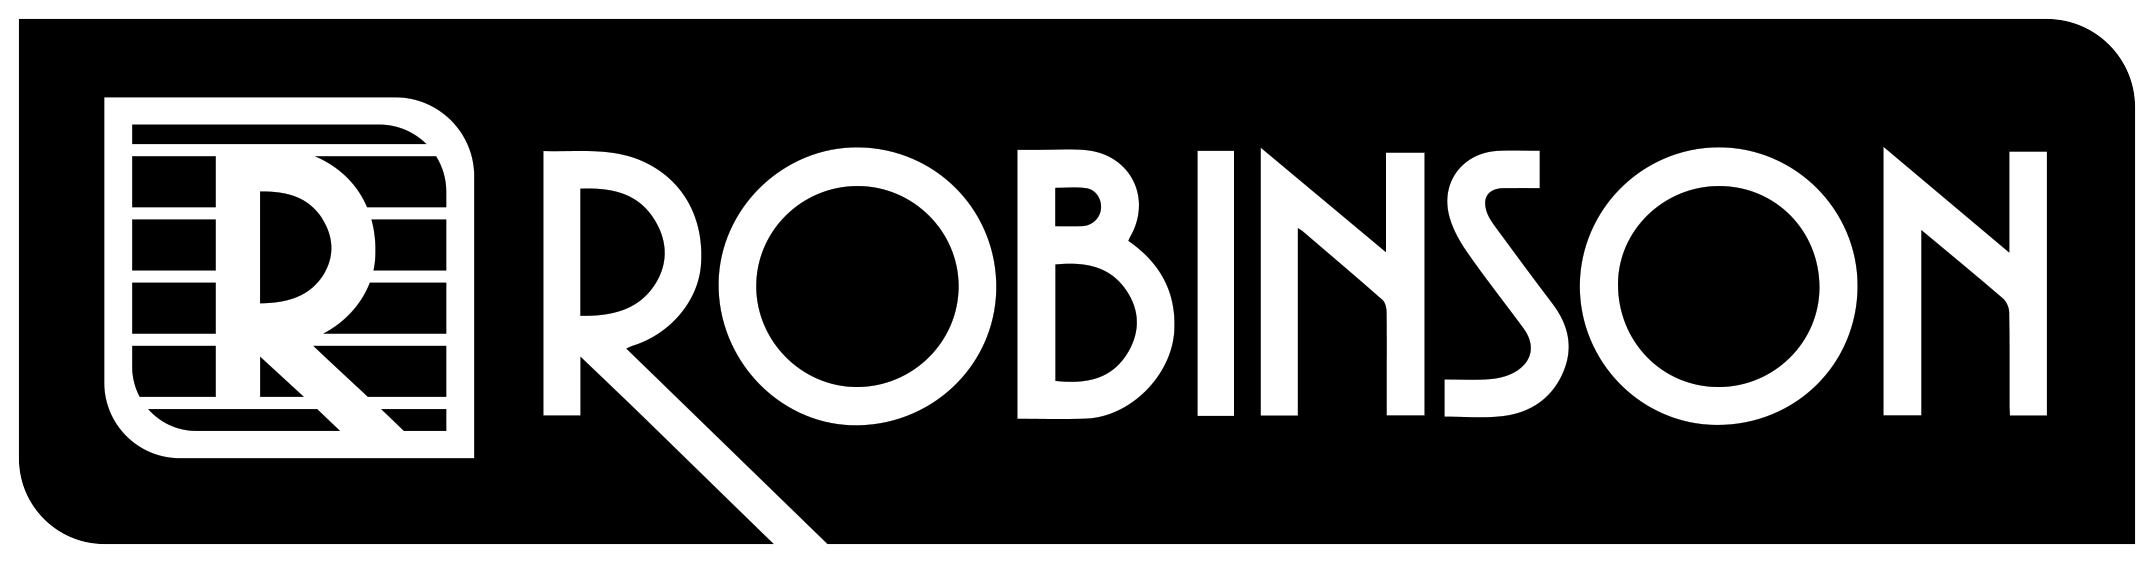 Robinson heating and cooling logo